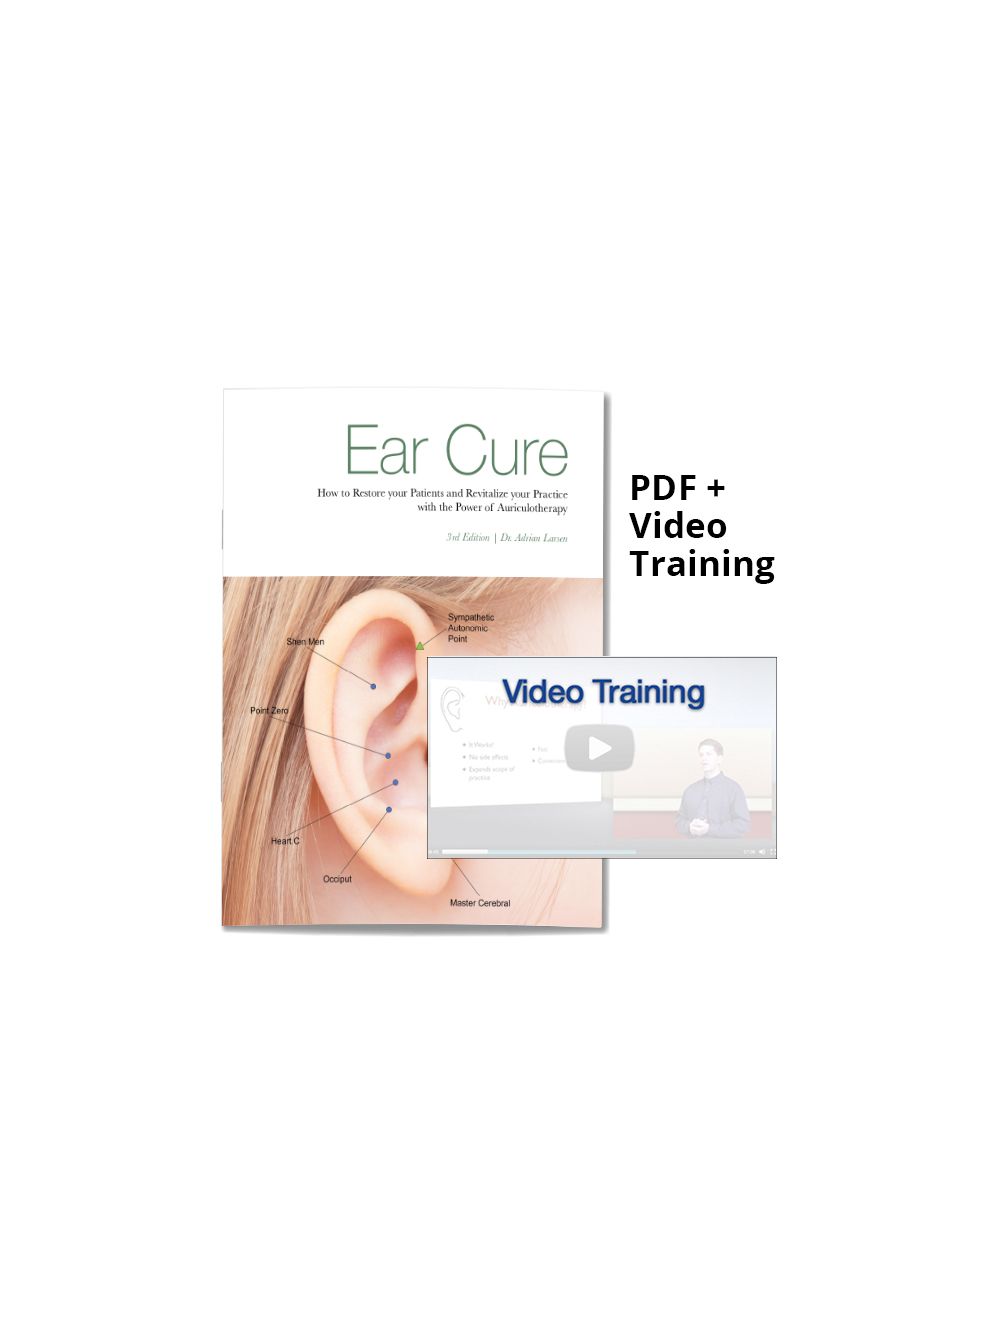 Auriculotherapy Training: The Ear Cure Online Video and PDF Book Set